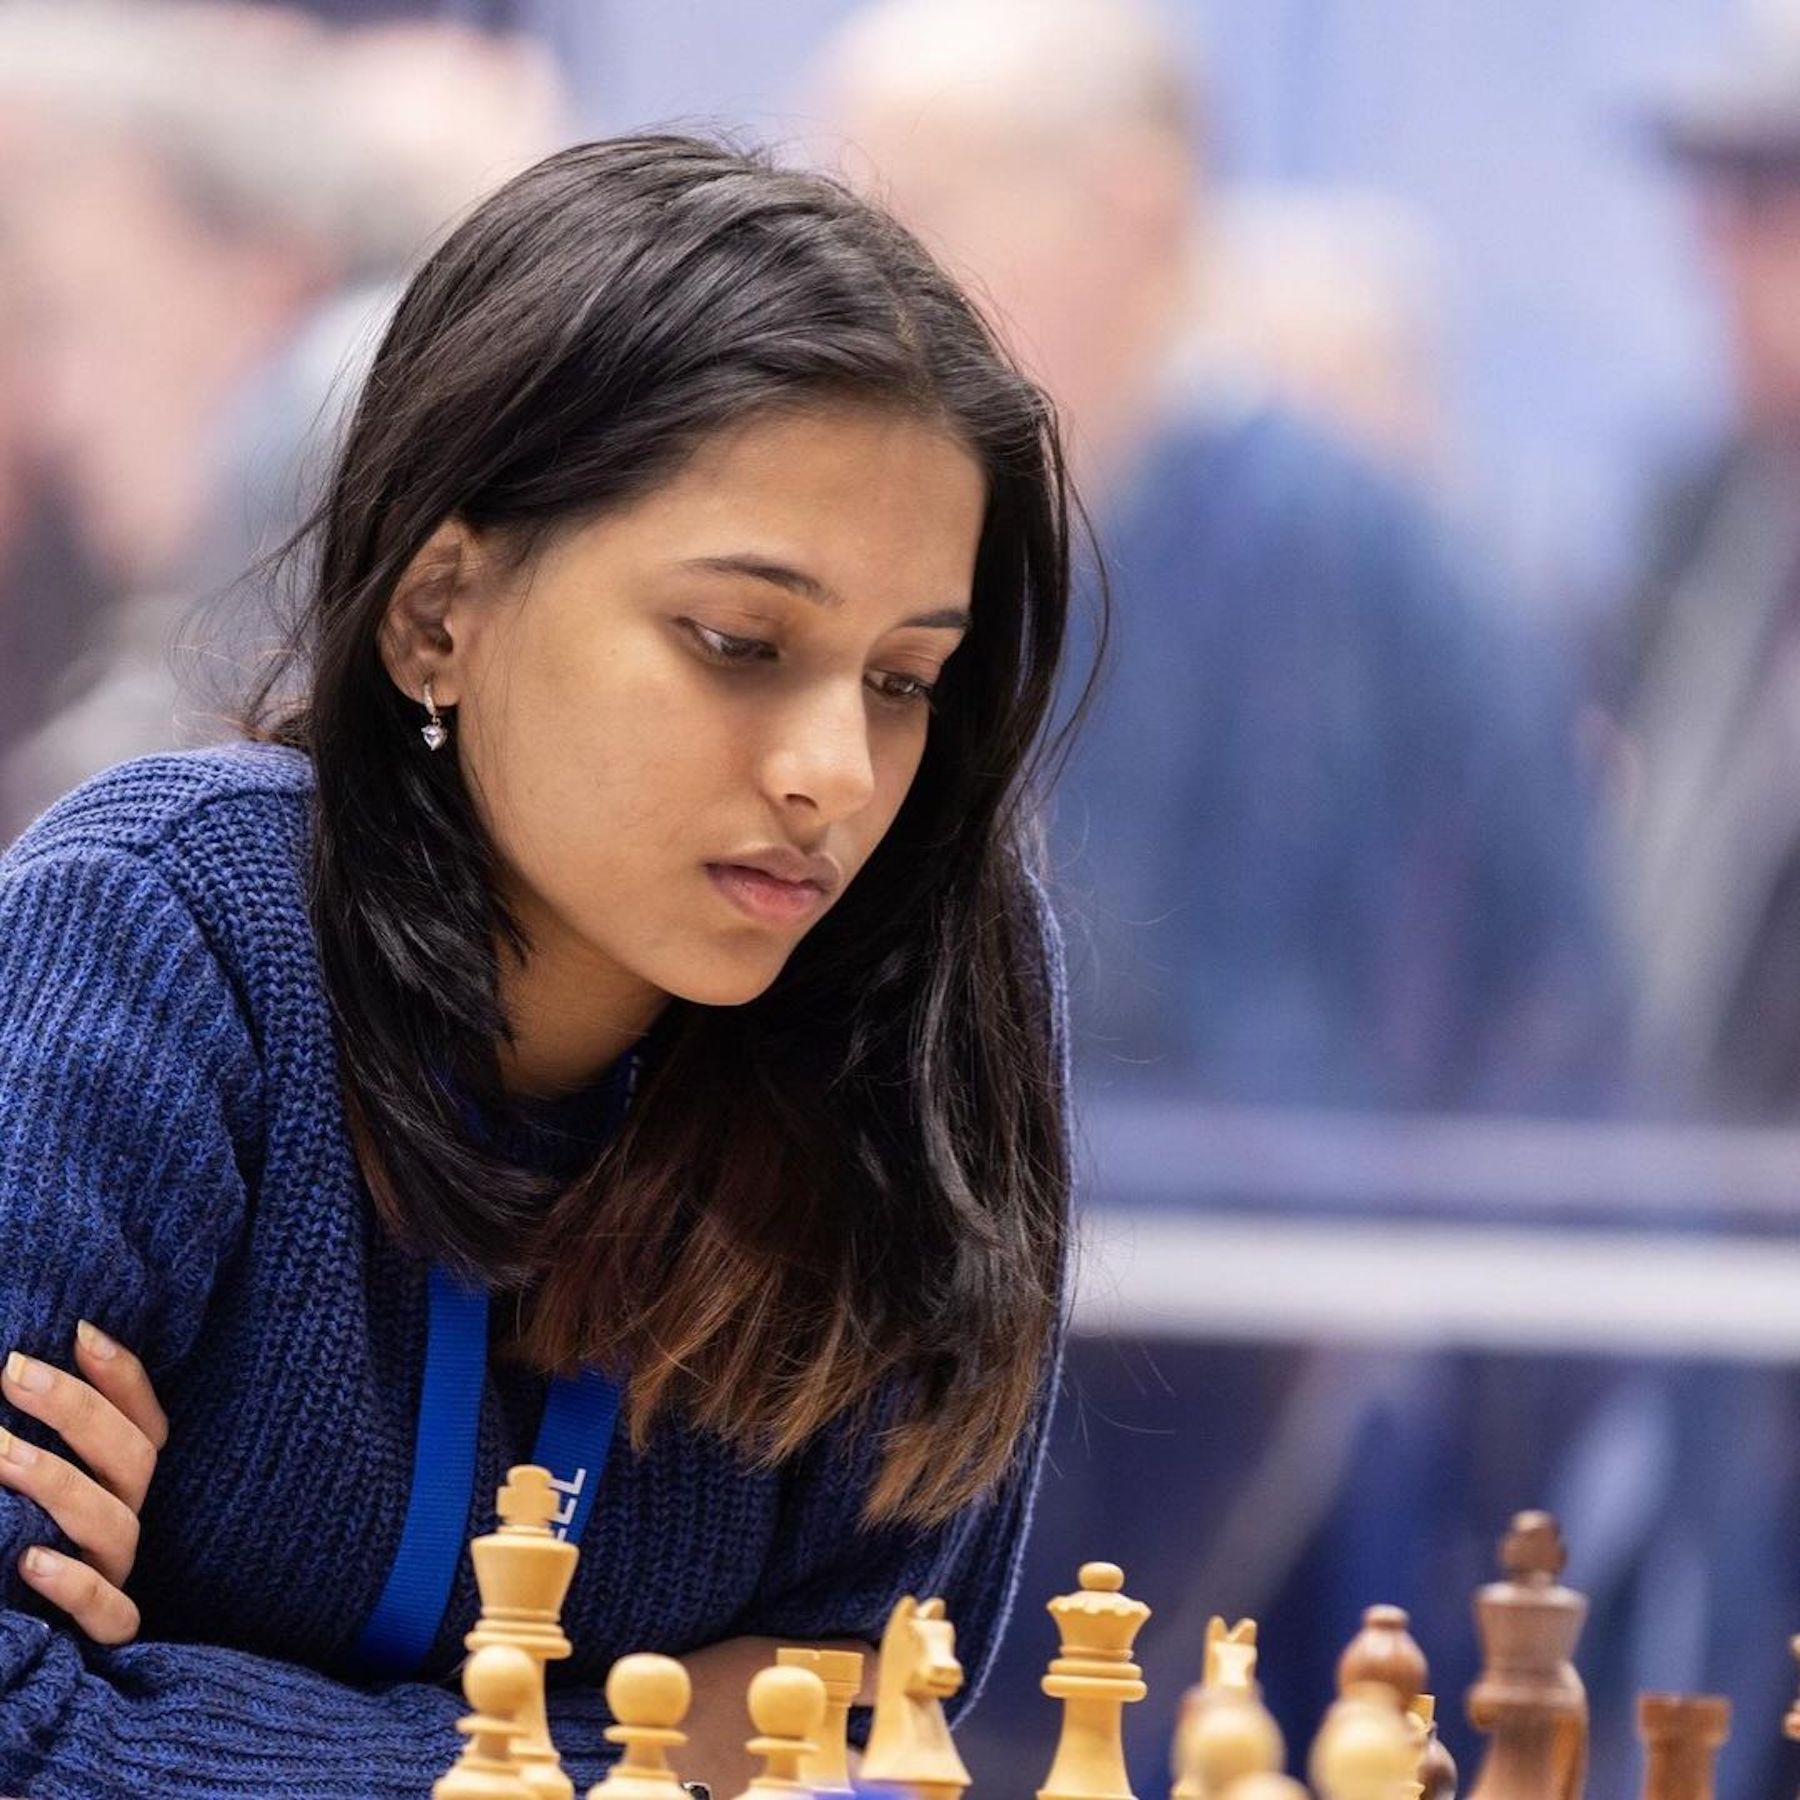 This Indian Woman Chess Player Has Called Out Sexism In Chess And People Are So Inspired By Her Bravery